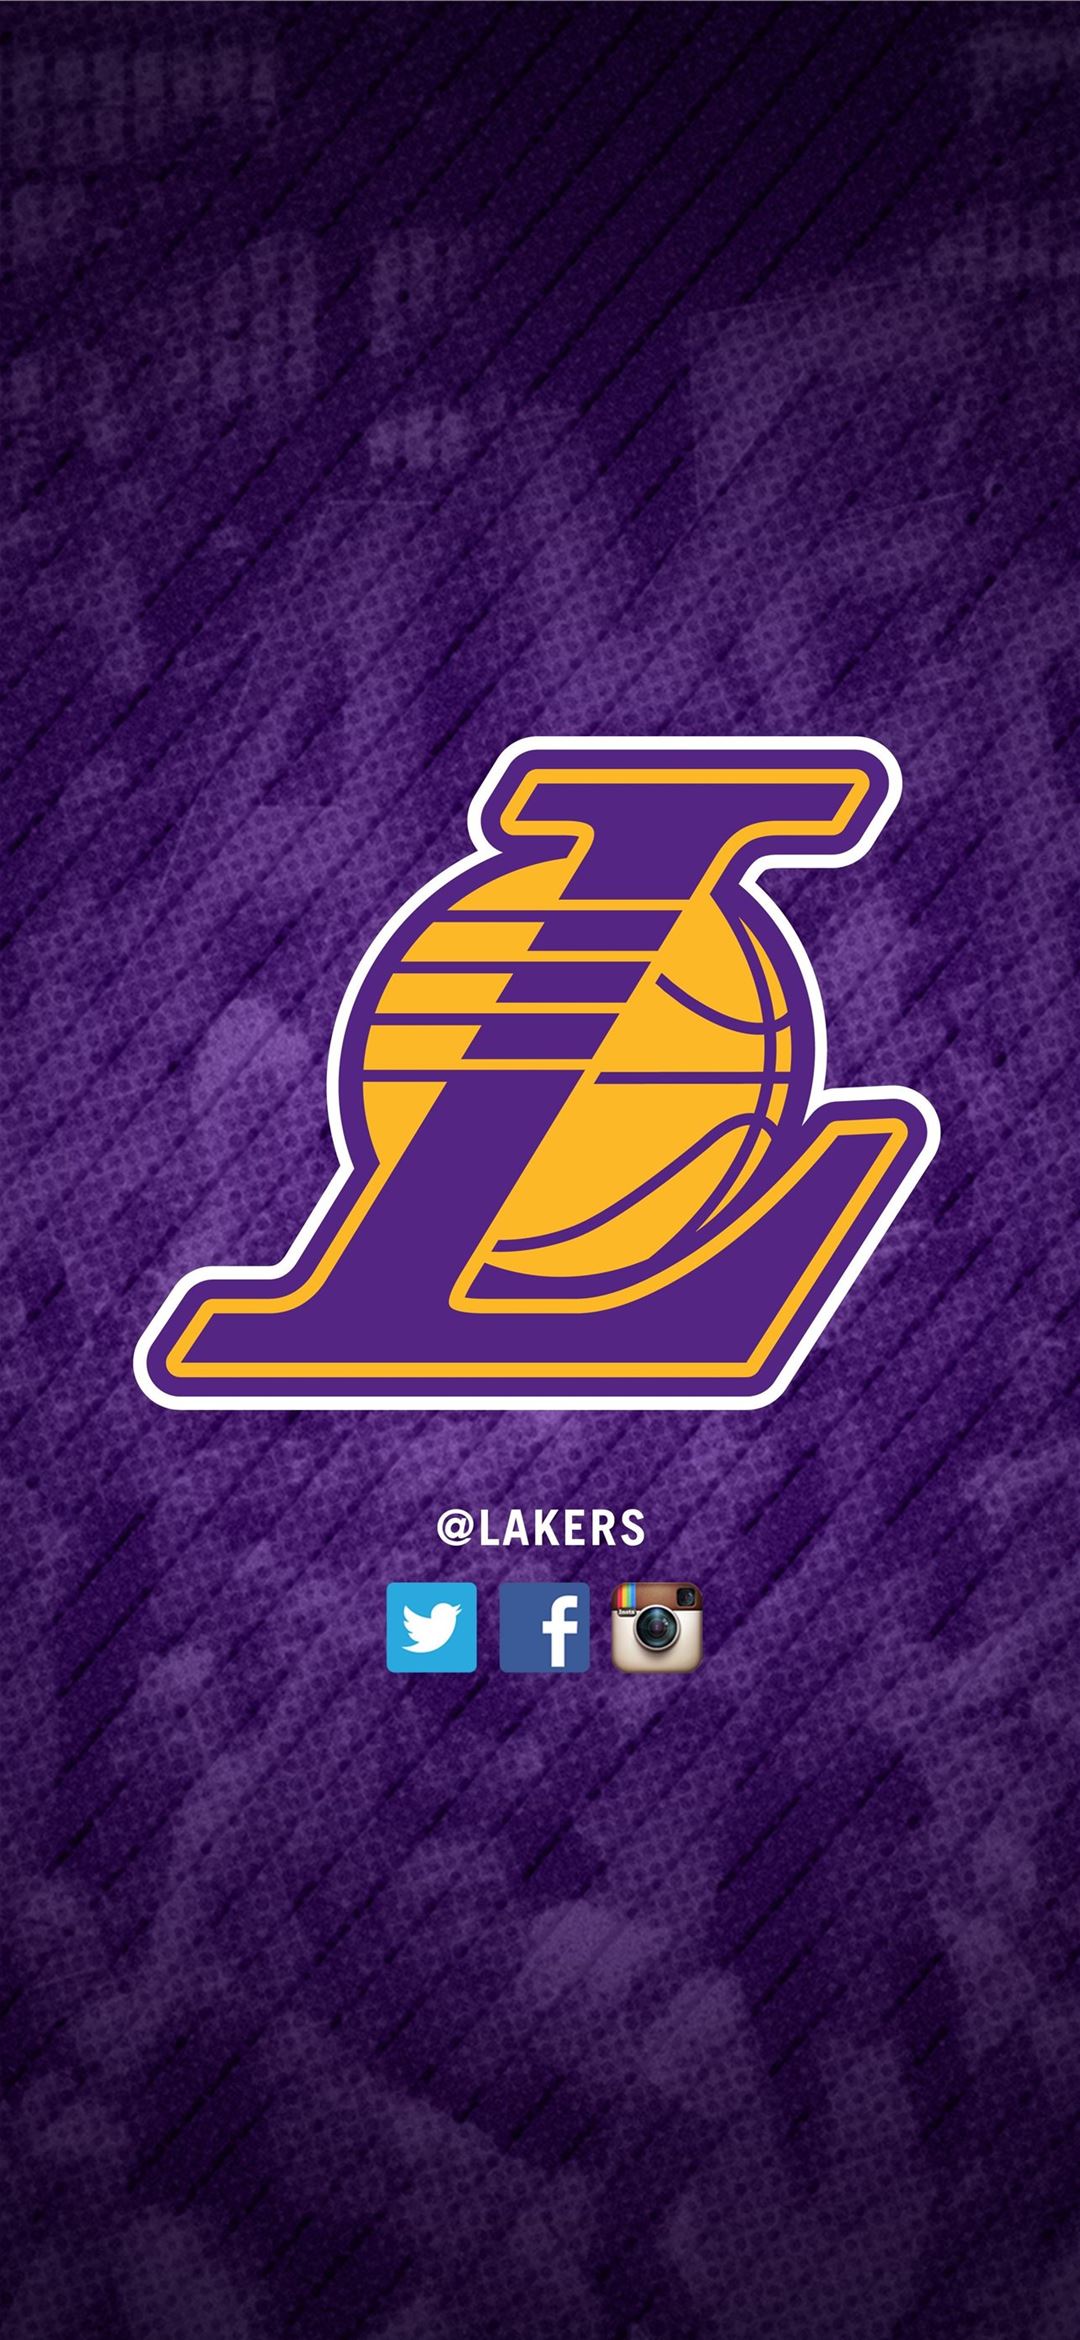 400+] Lakers Wallpapers | Wallpapers.com